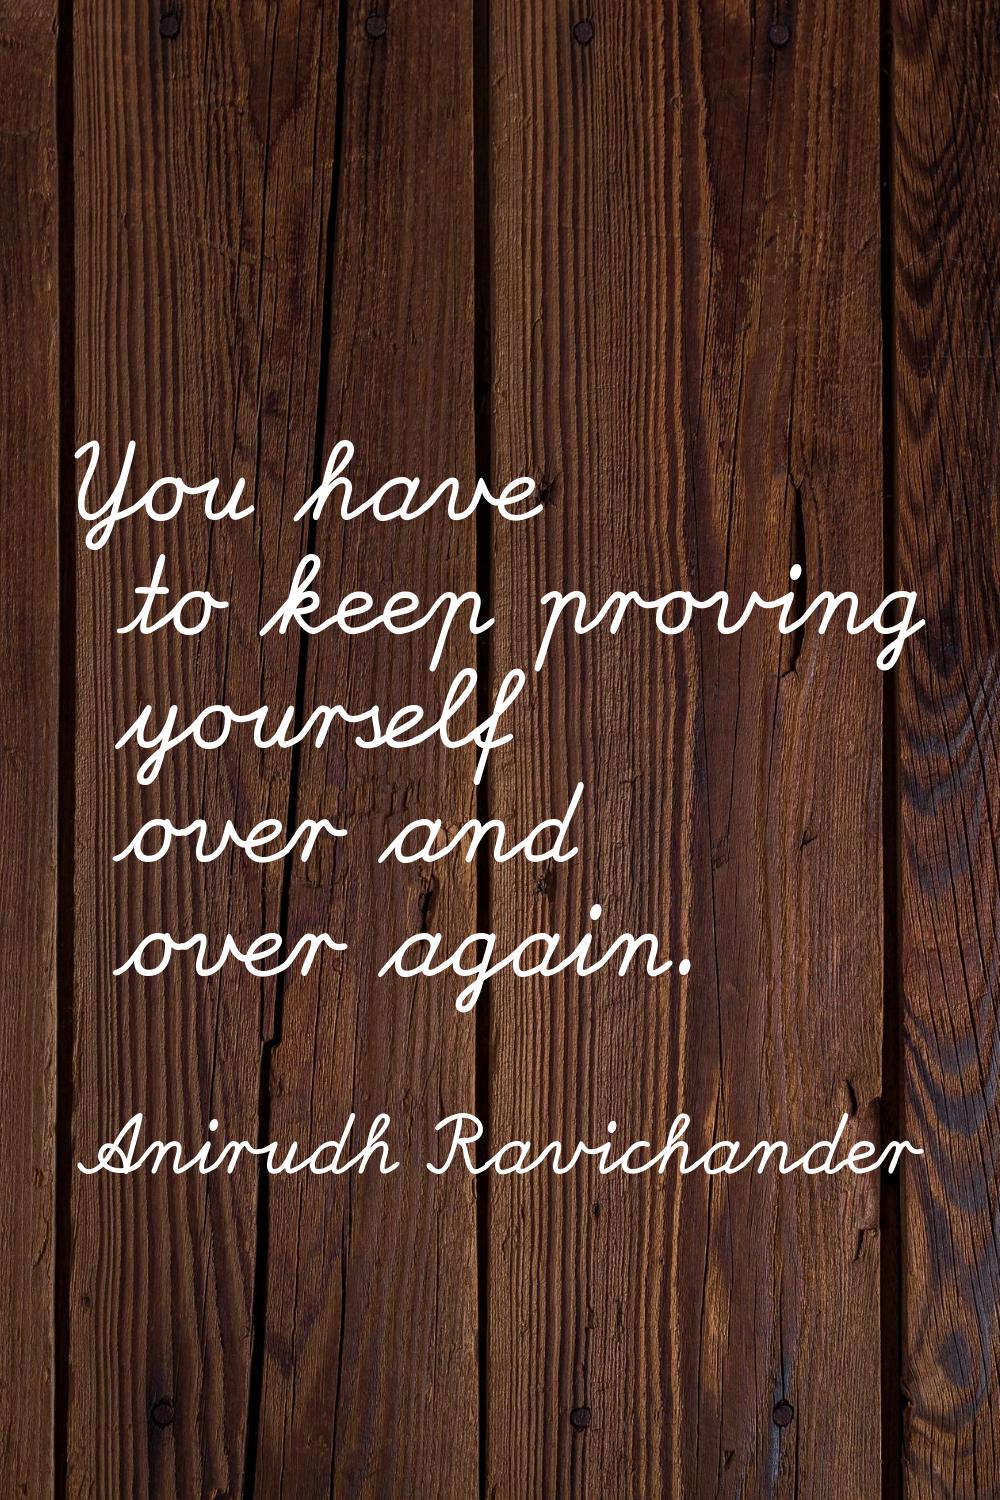 You have to keep proving yourself over and over again.